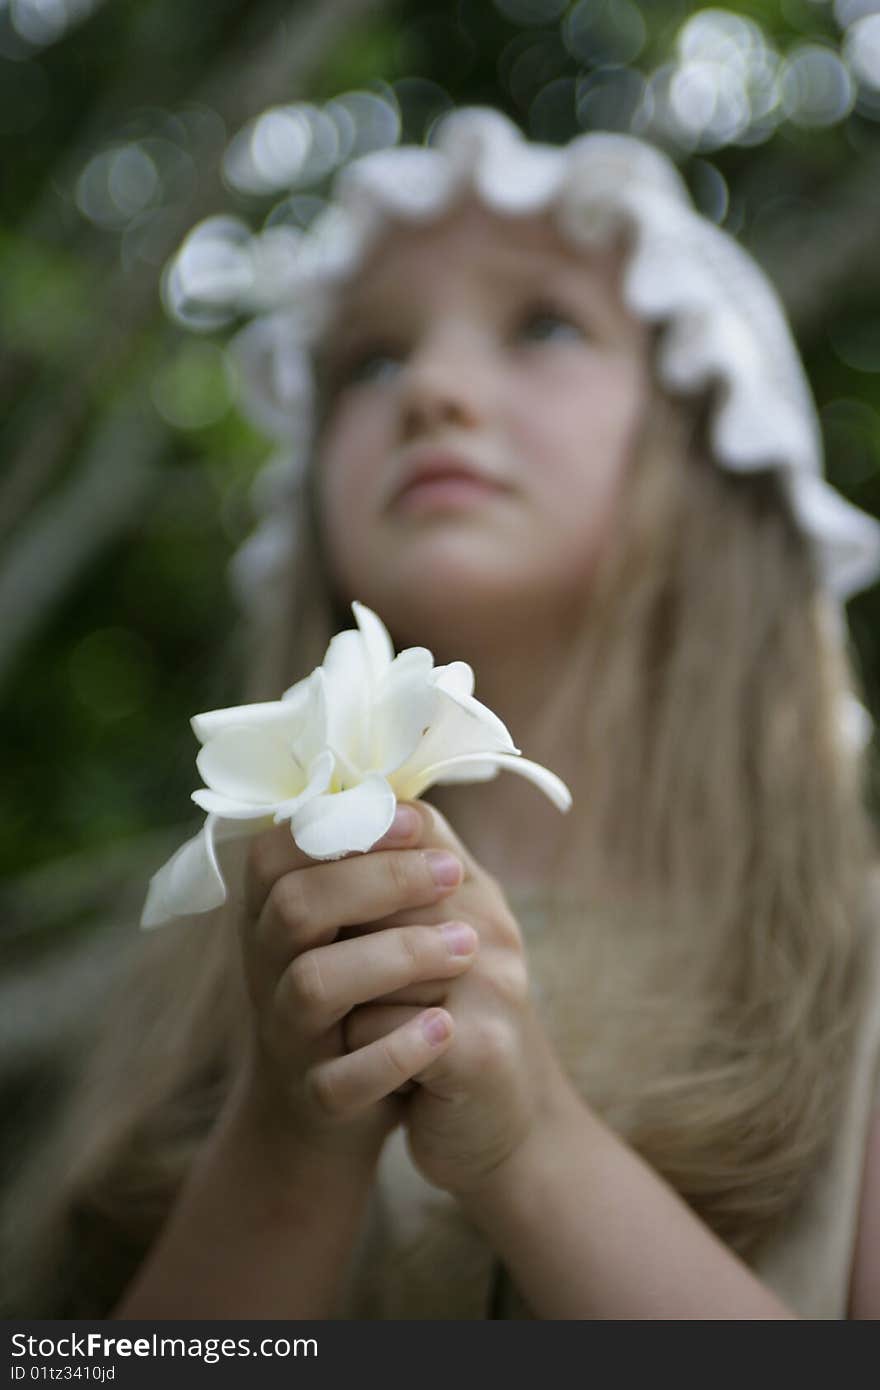 Little praying girl with white flowers in hands. Little praying girl with white flowers in hands